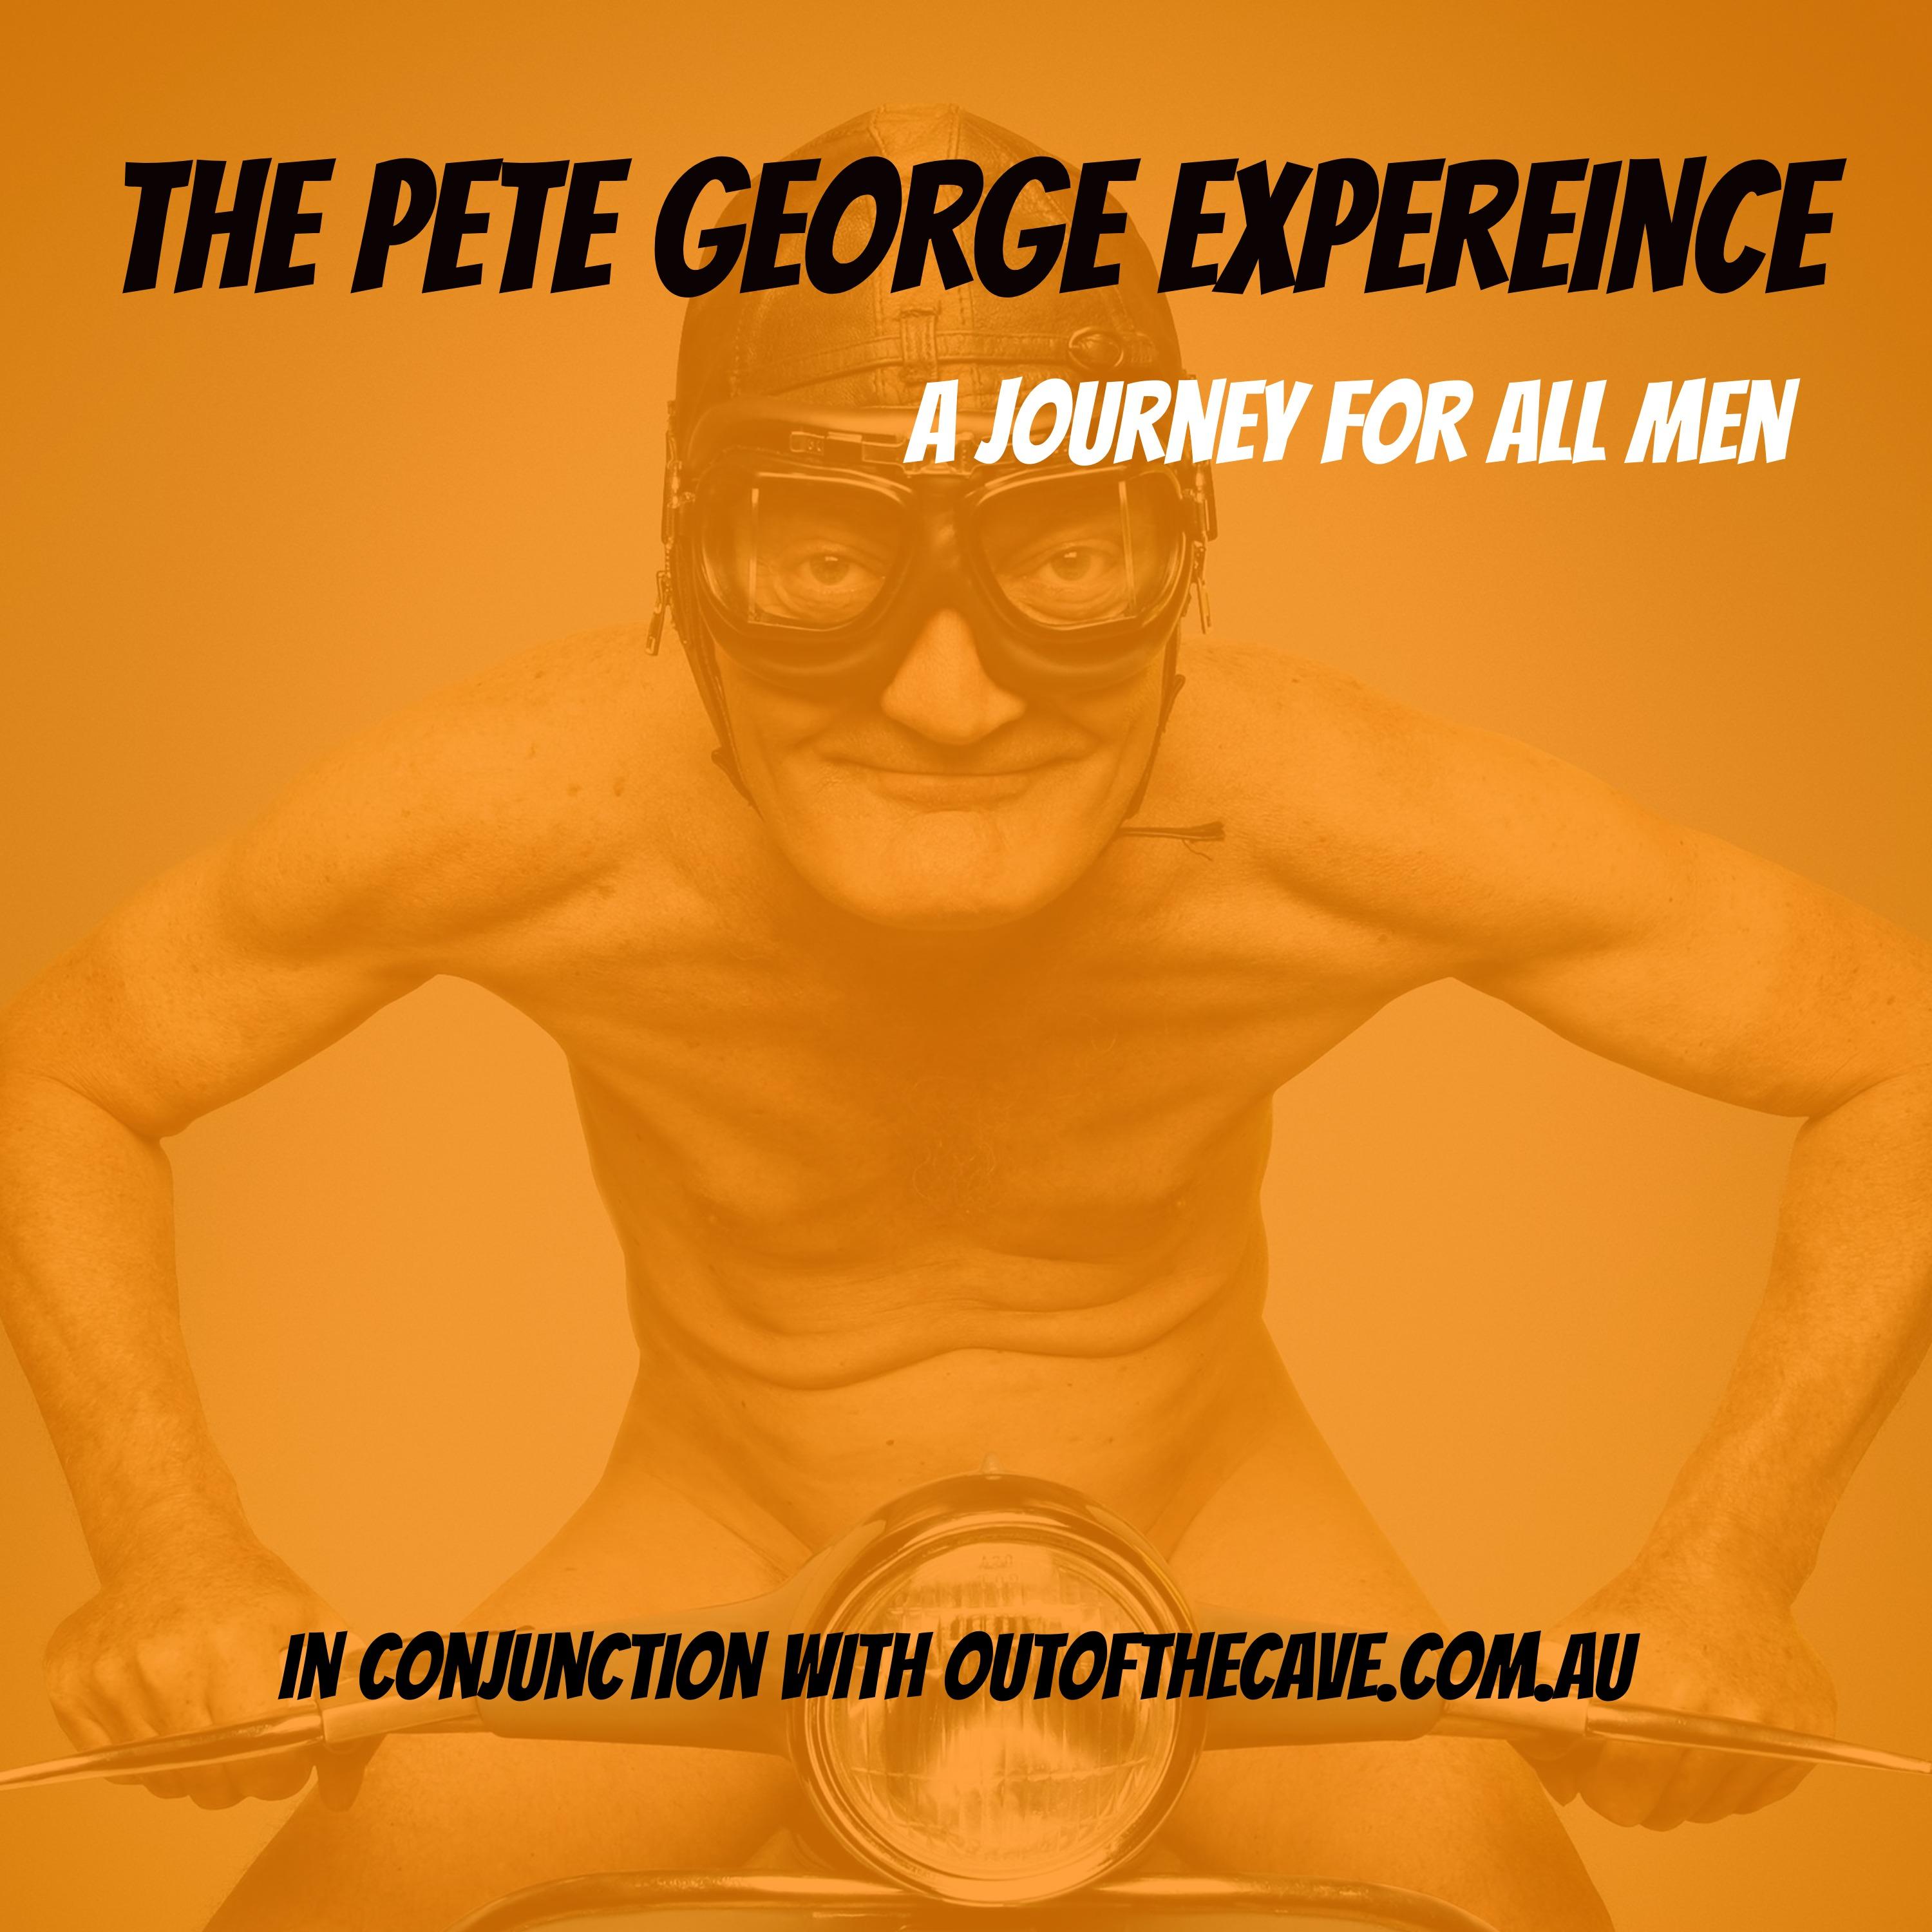 The Pete George Experience